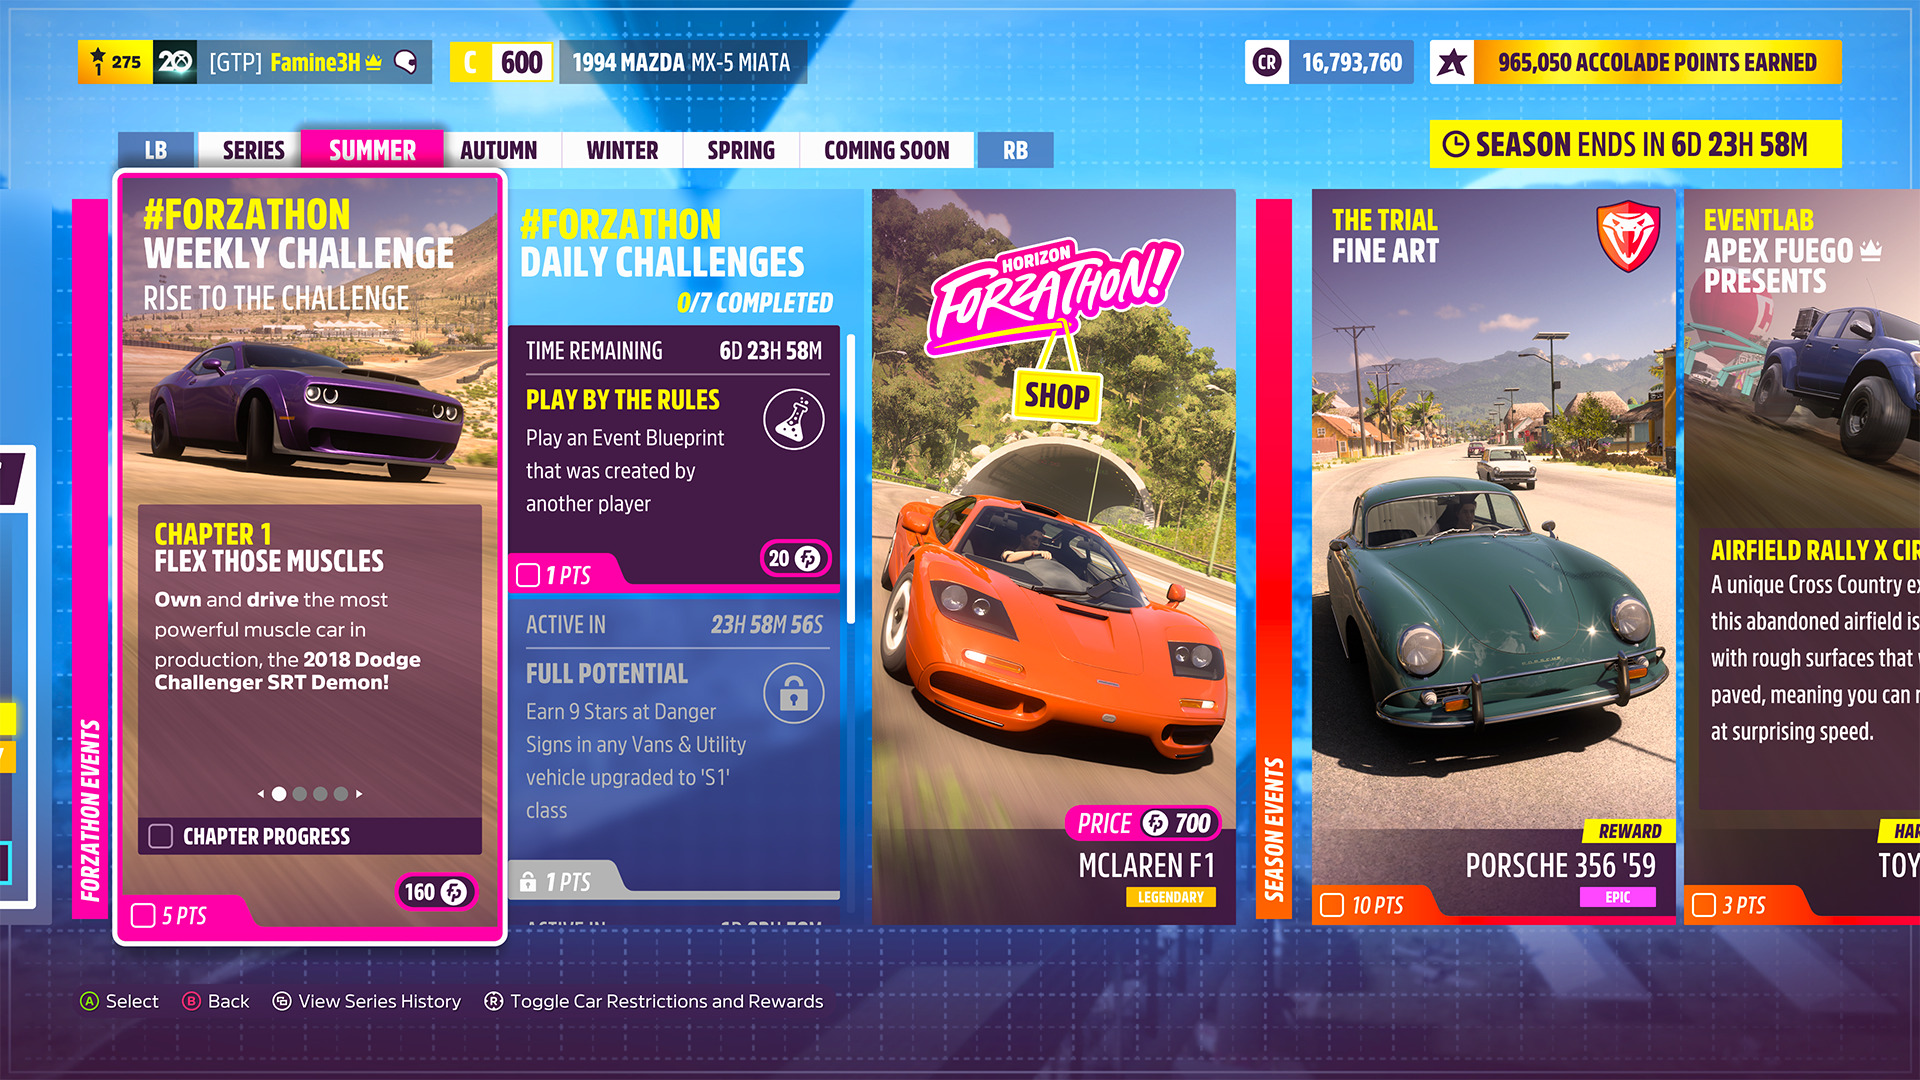 What are you expecting/look forward to in Horizon 6? : r/ForzaHorizon5